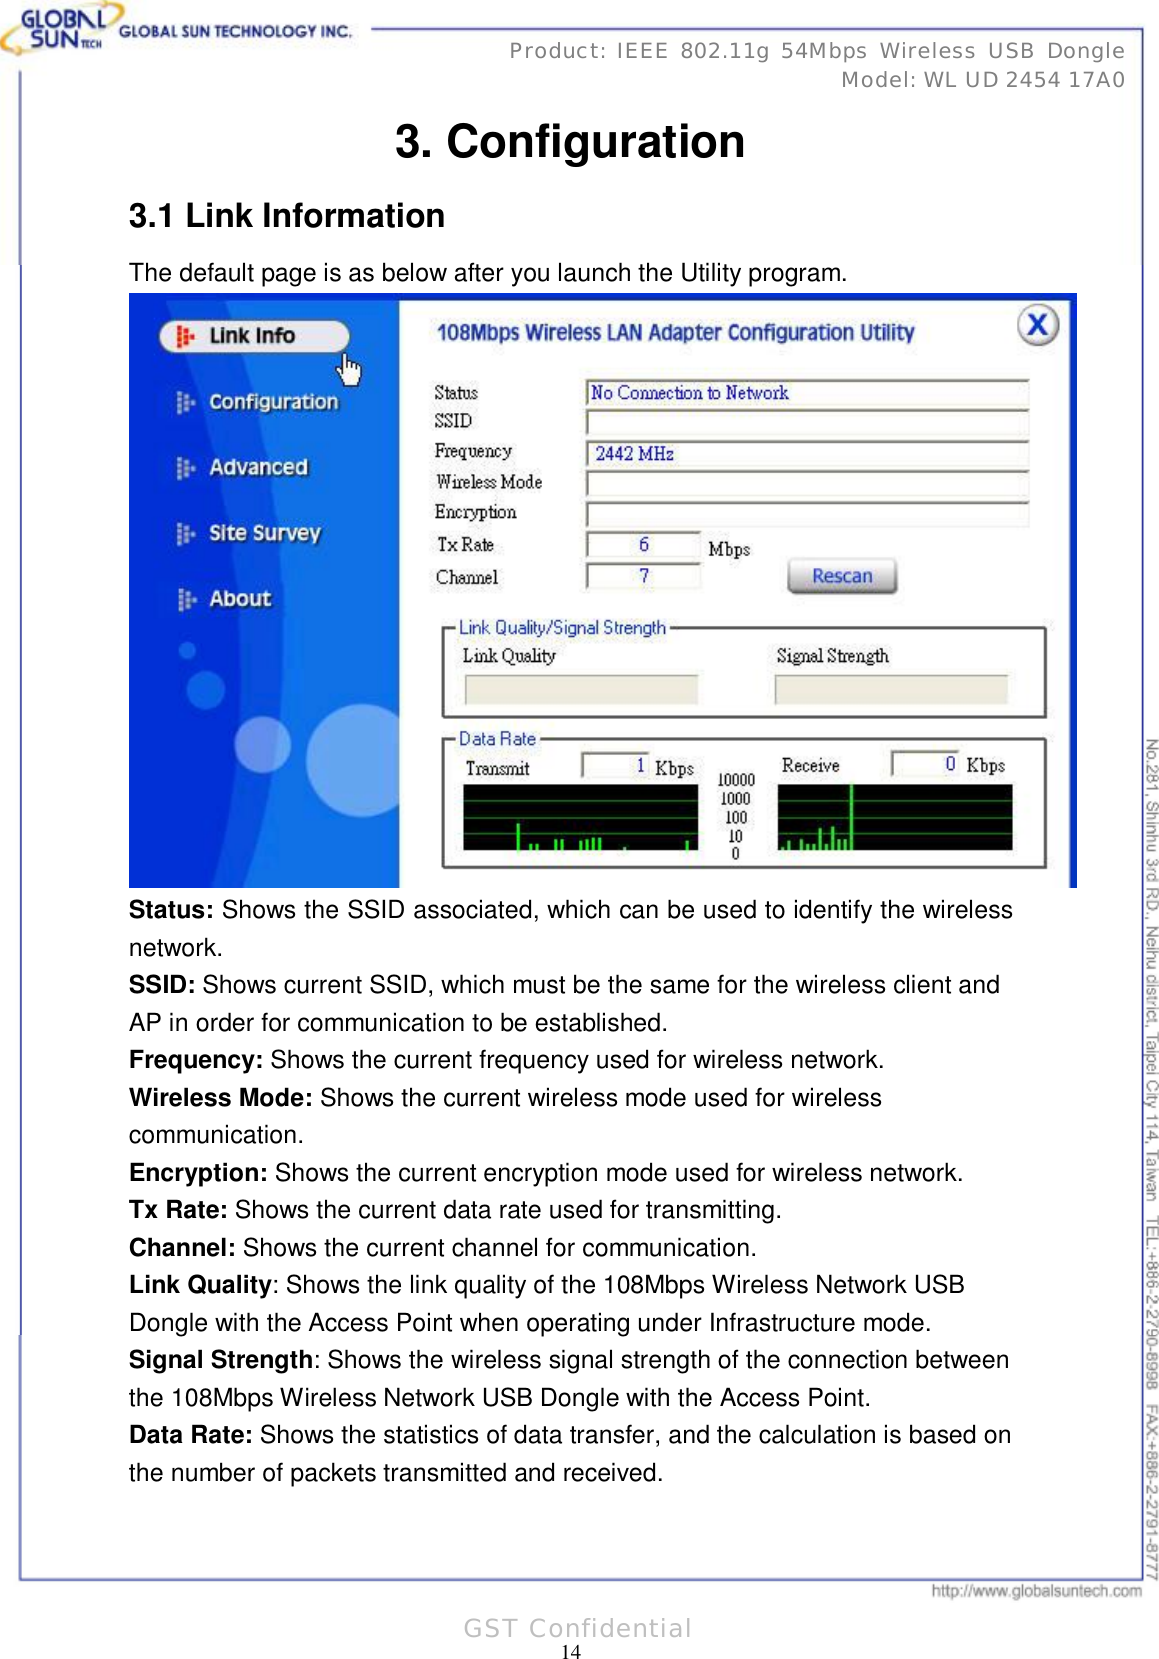      31 14Product: IEEE 802.11g 54Mbps Wireless USB Dongle Model: WL UD 2454 17A0 GST Confidential 3. Configuration 3.1 Link Information The default page is as below after you launch the Utility program.  Status: Shows the SSID associated, which can be used to identify the wireless network. SSID: Shows current SSID, which must be the same for the wireless client and AP in order for communication to be established. Frequency: Shows the current frequency used for wireless network. Wireless Mode: Shows the current wireless mode used for wireless communication. Encryption: Shows the current encryption mode used for wireless network. Tx Rate: Shows the current data rate used for transmitting. Channel: Shows the current channel for communication. Link Quality: Shows the link quality of the 108Mbps Wireless Network USB Dongle with the Access Point when operating under Infrastructure mode. Signal Strength: Shows the wireless signal strength of the connection between the 108Mbps Wireless Network USB Dongle with the Access Point. Data Rate: Shows the statistics of data transfer, and the calculation is based on the number of packets transmitted and received. 